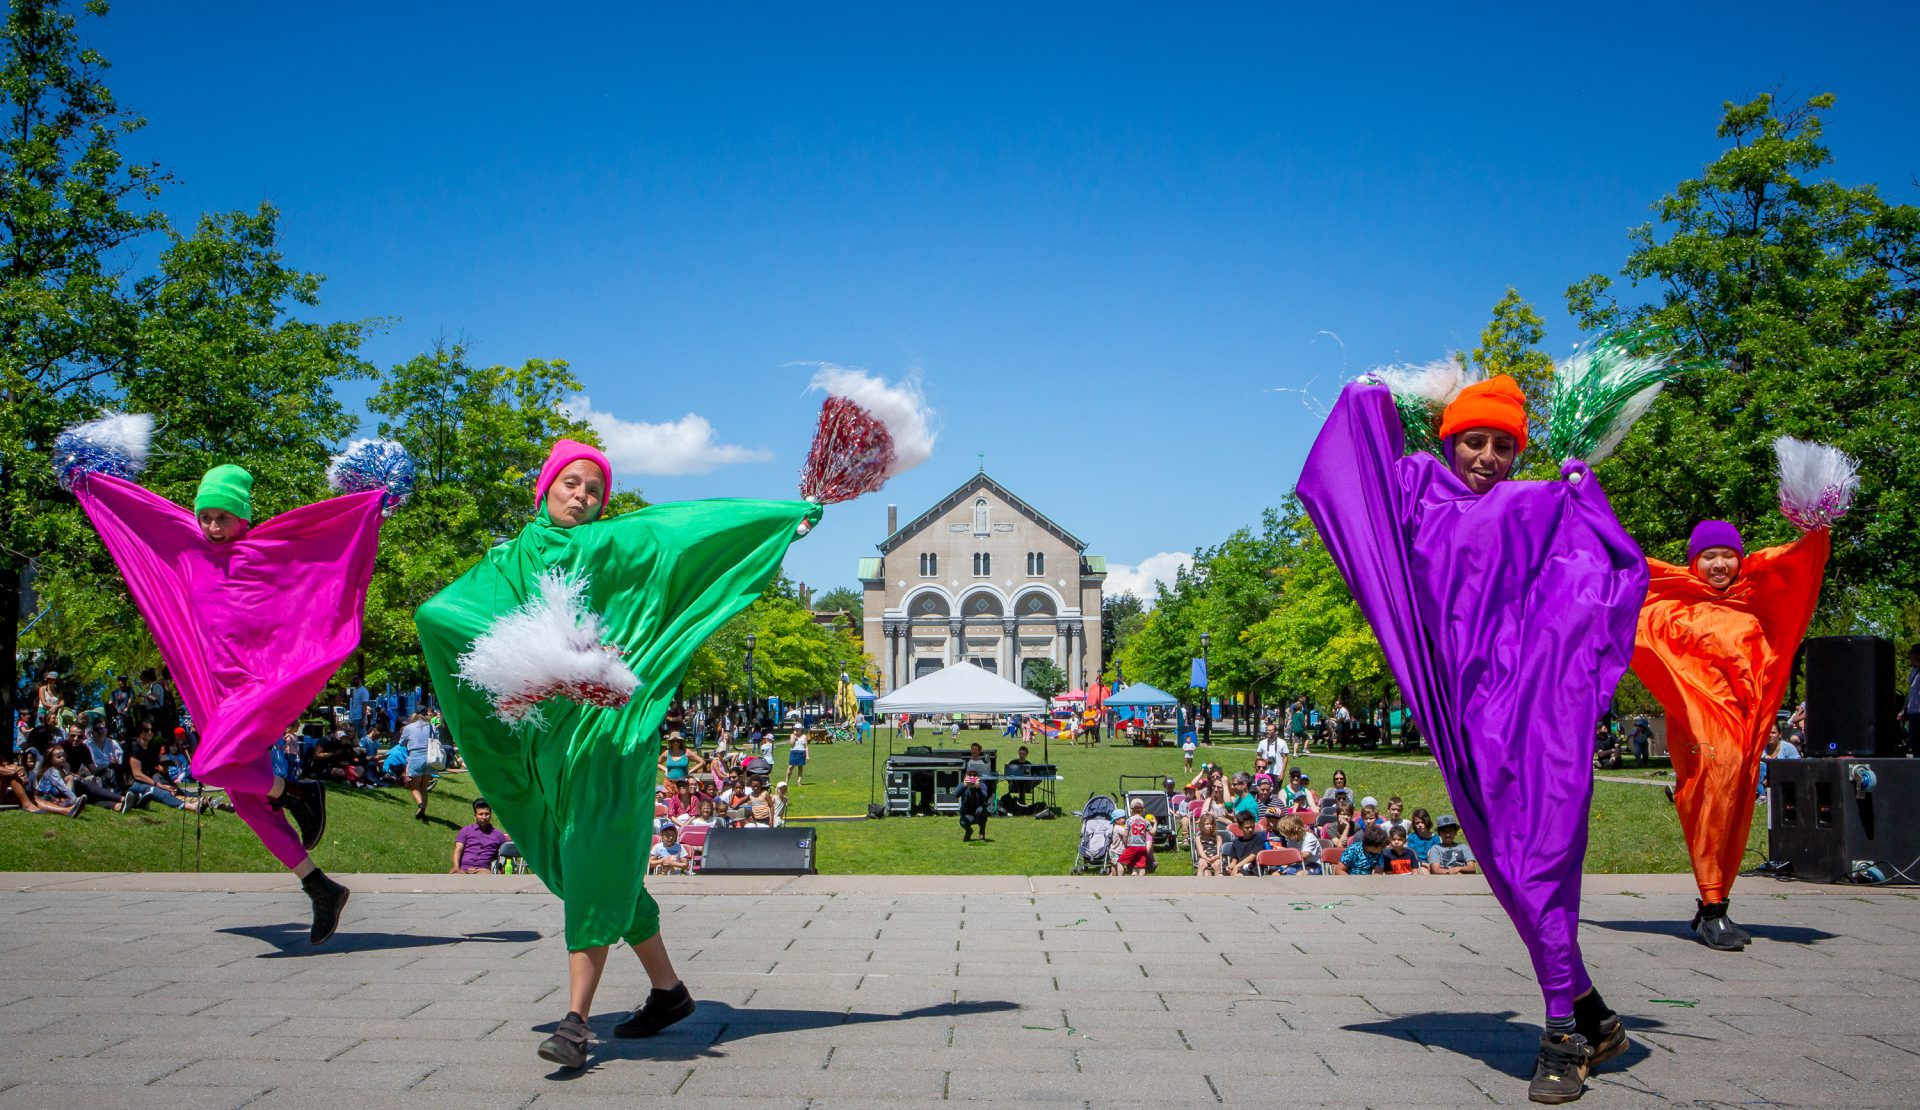 Colorful dance performance in the Quartier culturel des Faubourgs, located in the Centre-Sud neighborhood of Montreal.